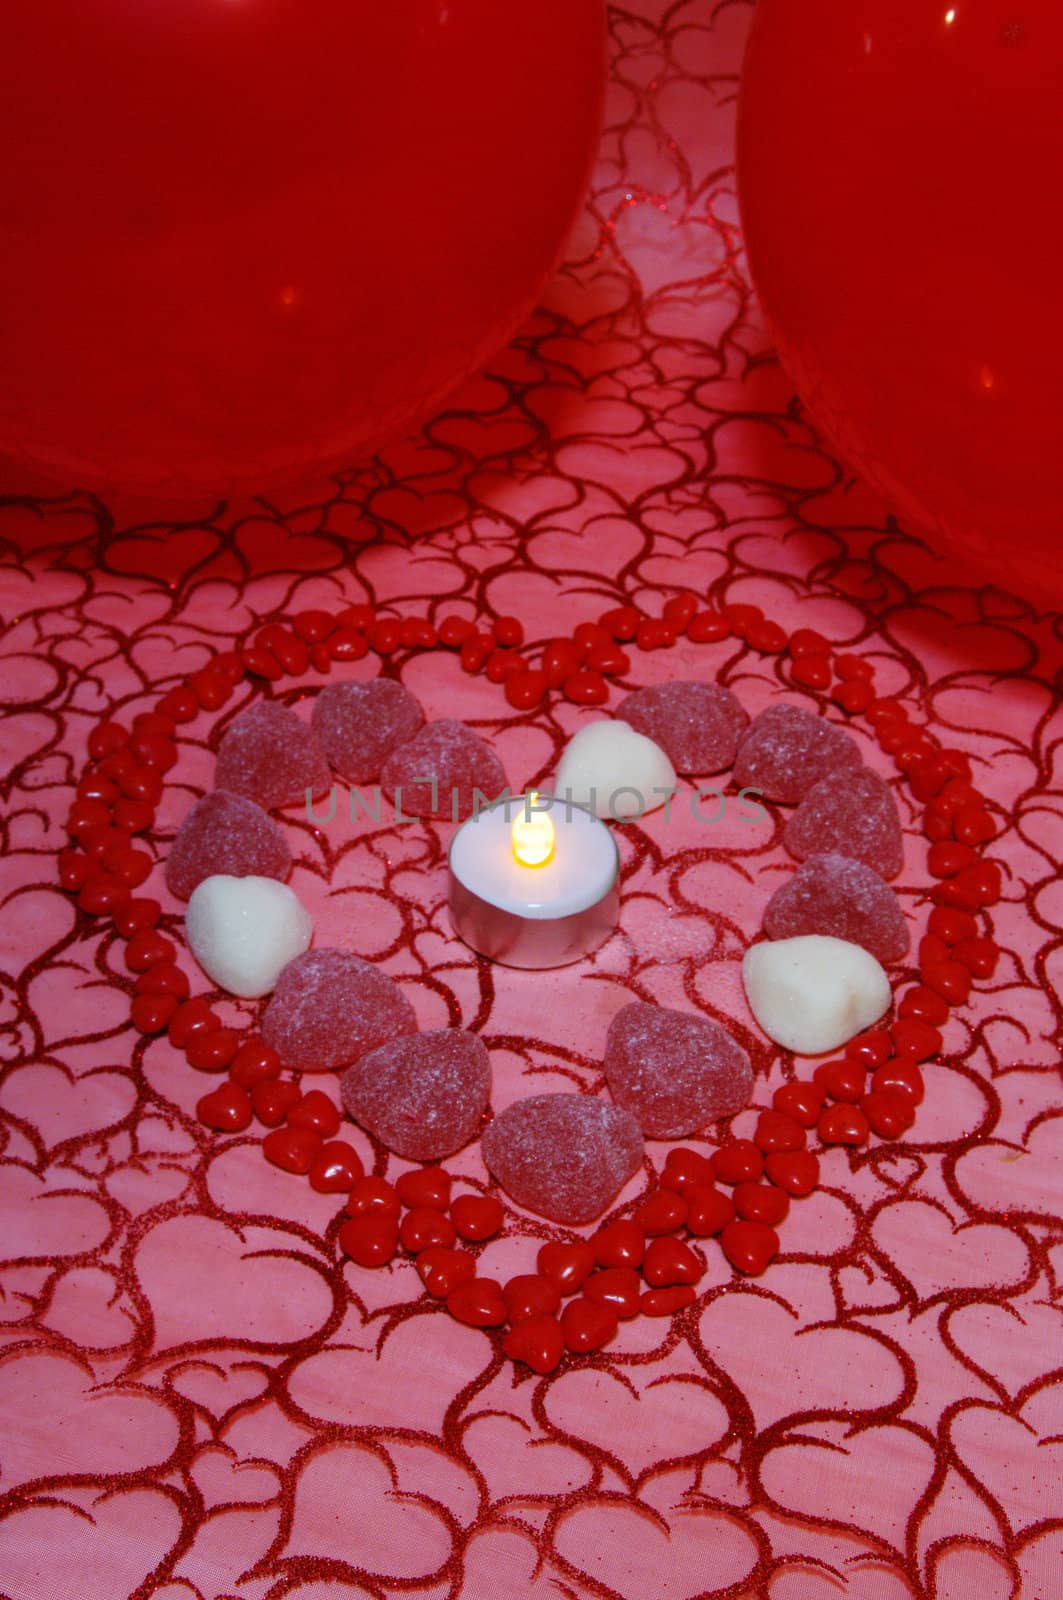 A background of material with hearts and cinnamon candies and balloons